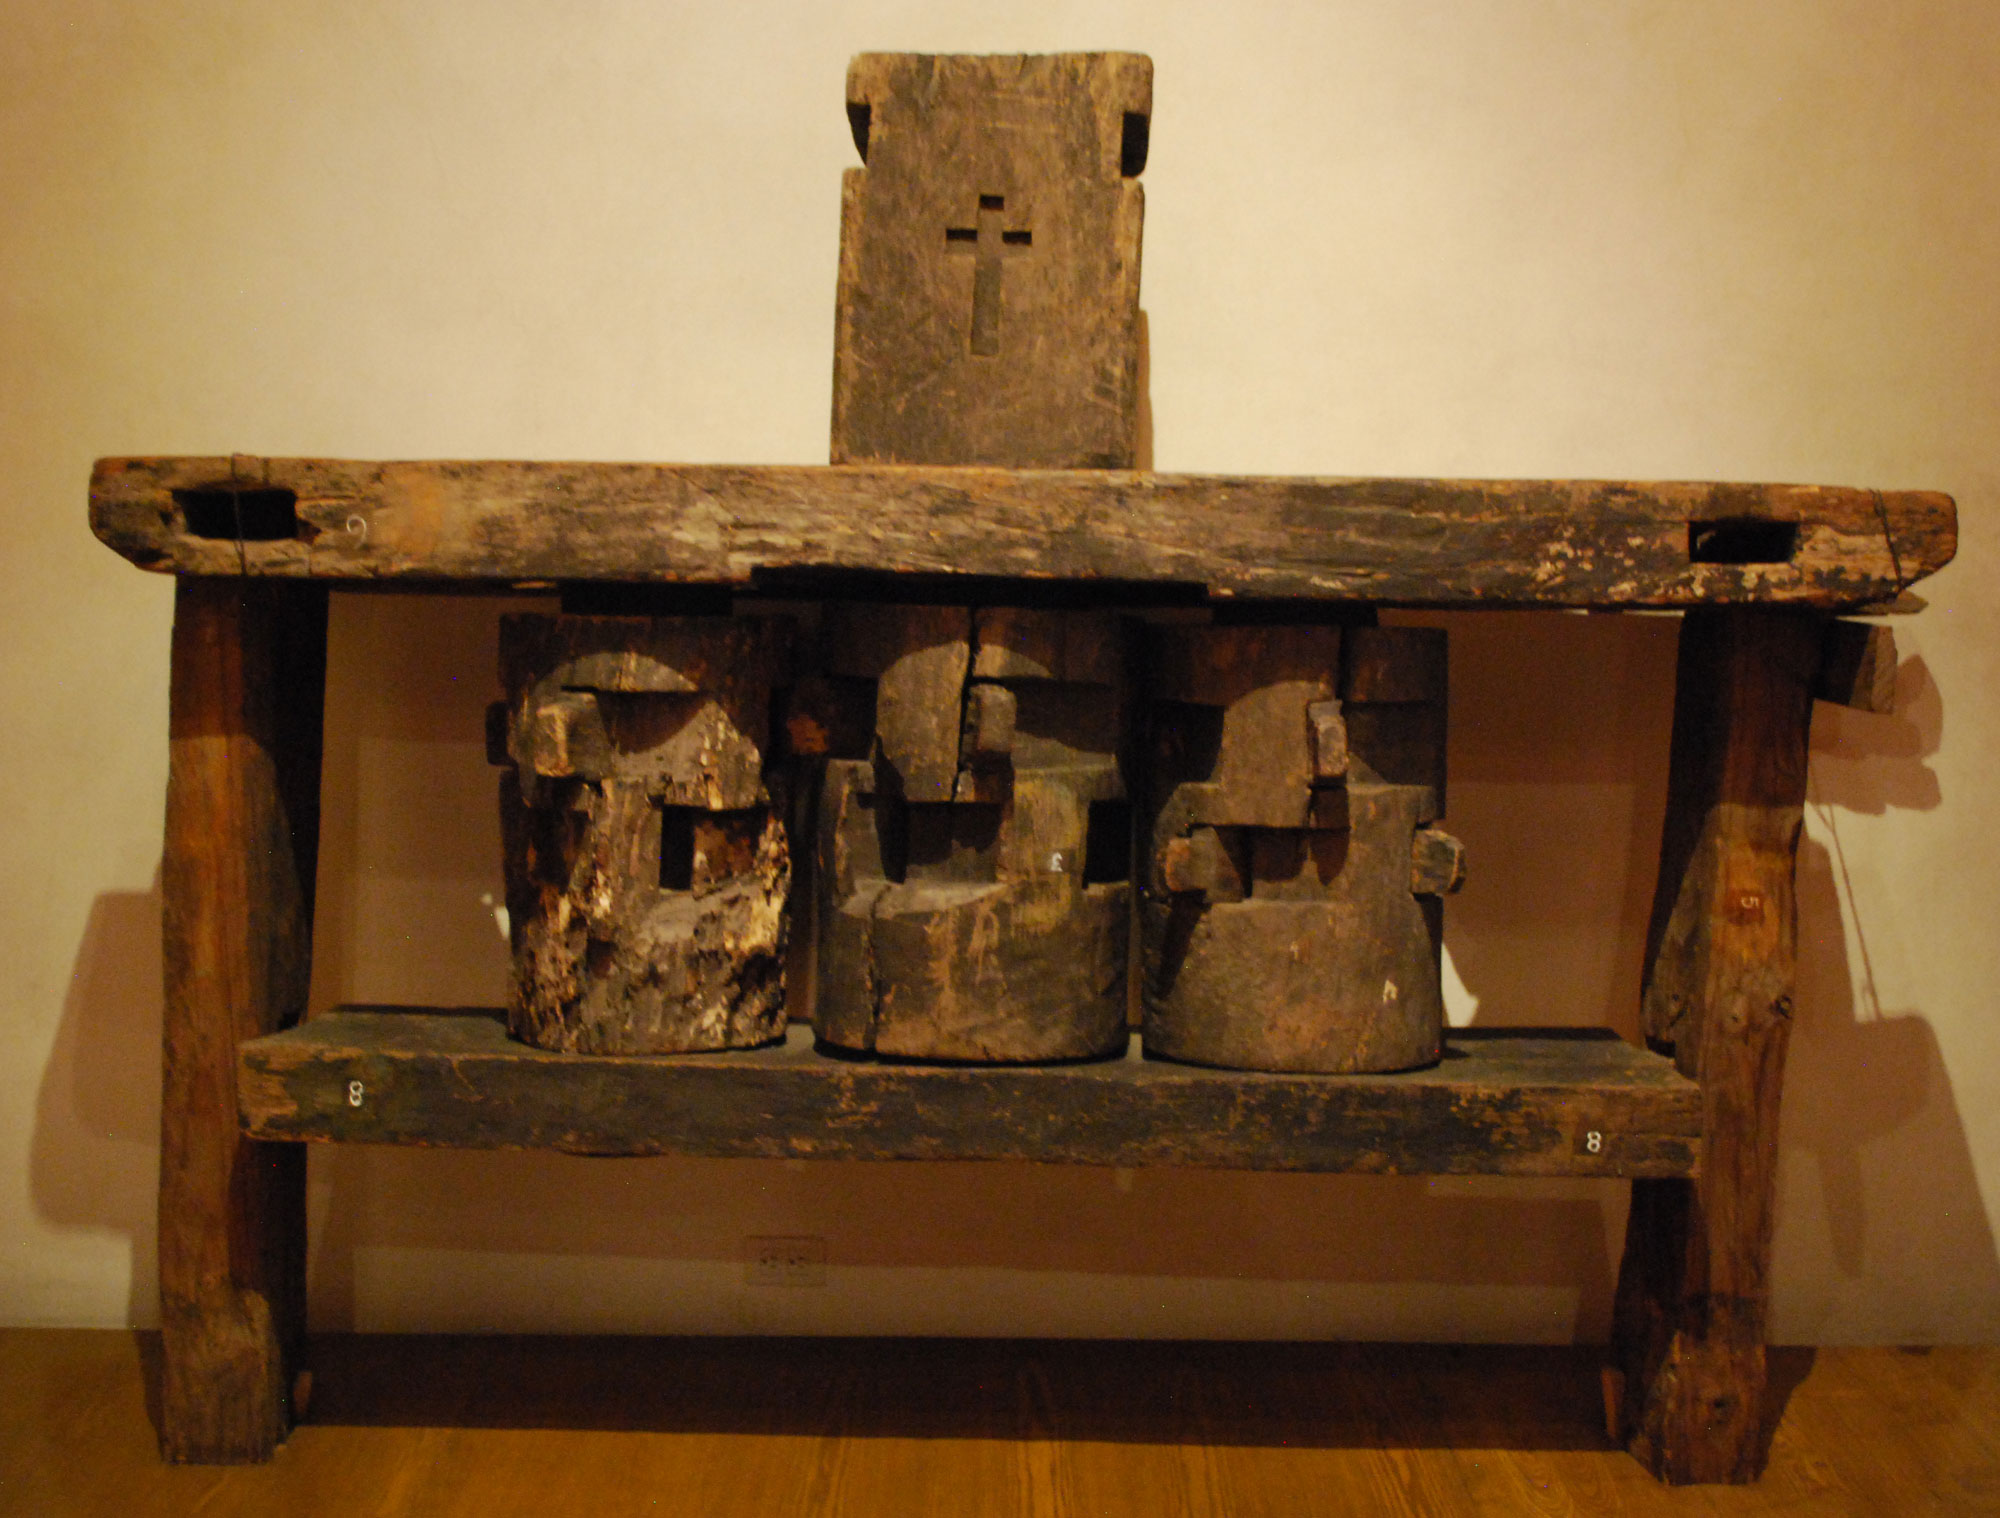 Photograph of wooden vertical sugarcane rollers on display in Mexico. The photo shows three wood rollers mounted in a wooden frame. A board with a Christian cross carved in it stands on top of the frame.